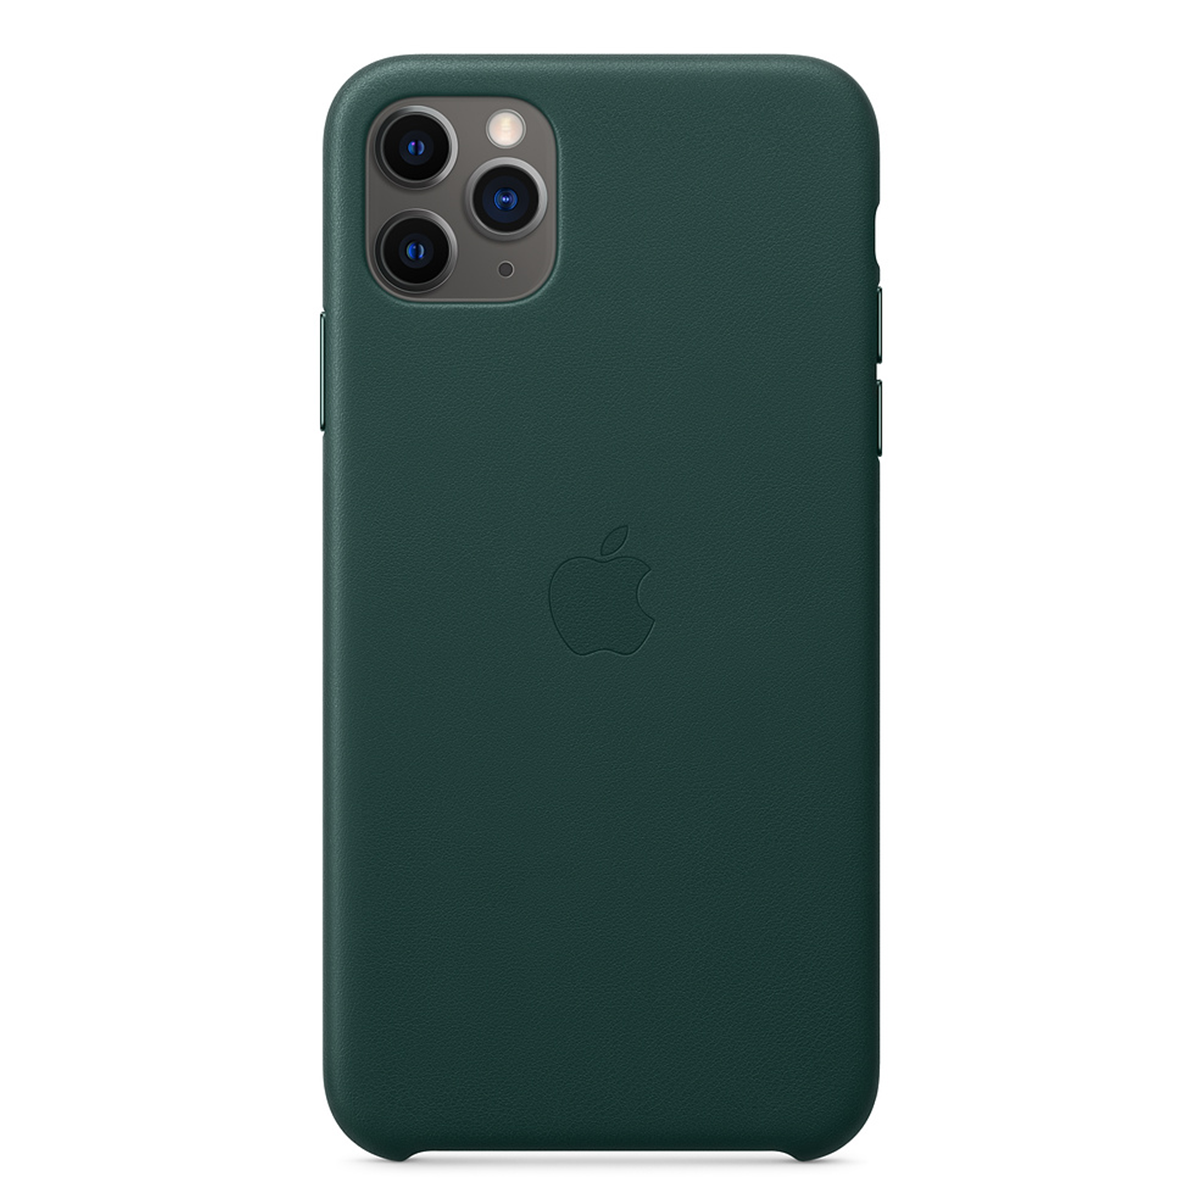 iPhone 11 Pro Max Leather Case Forest Green